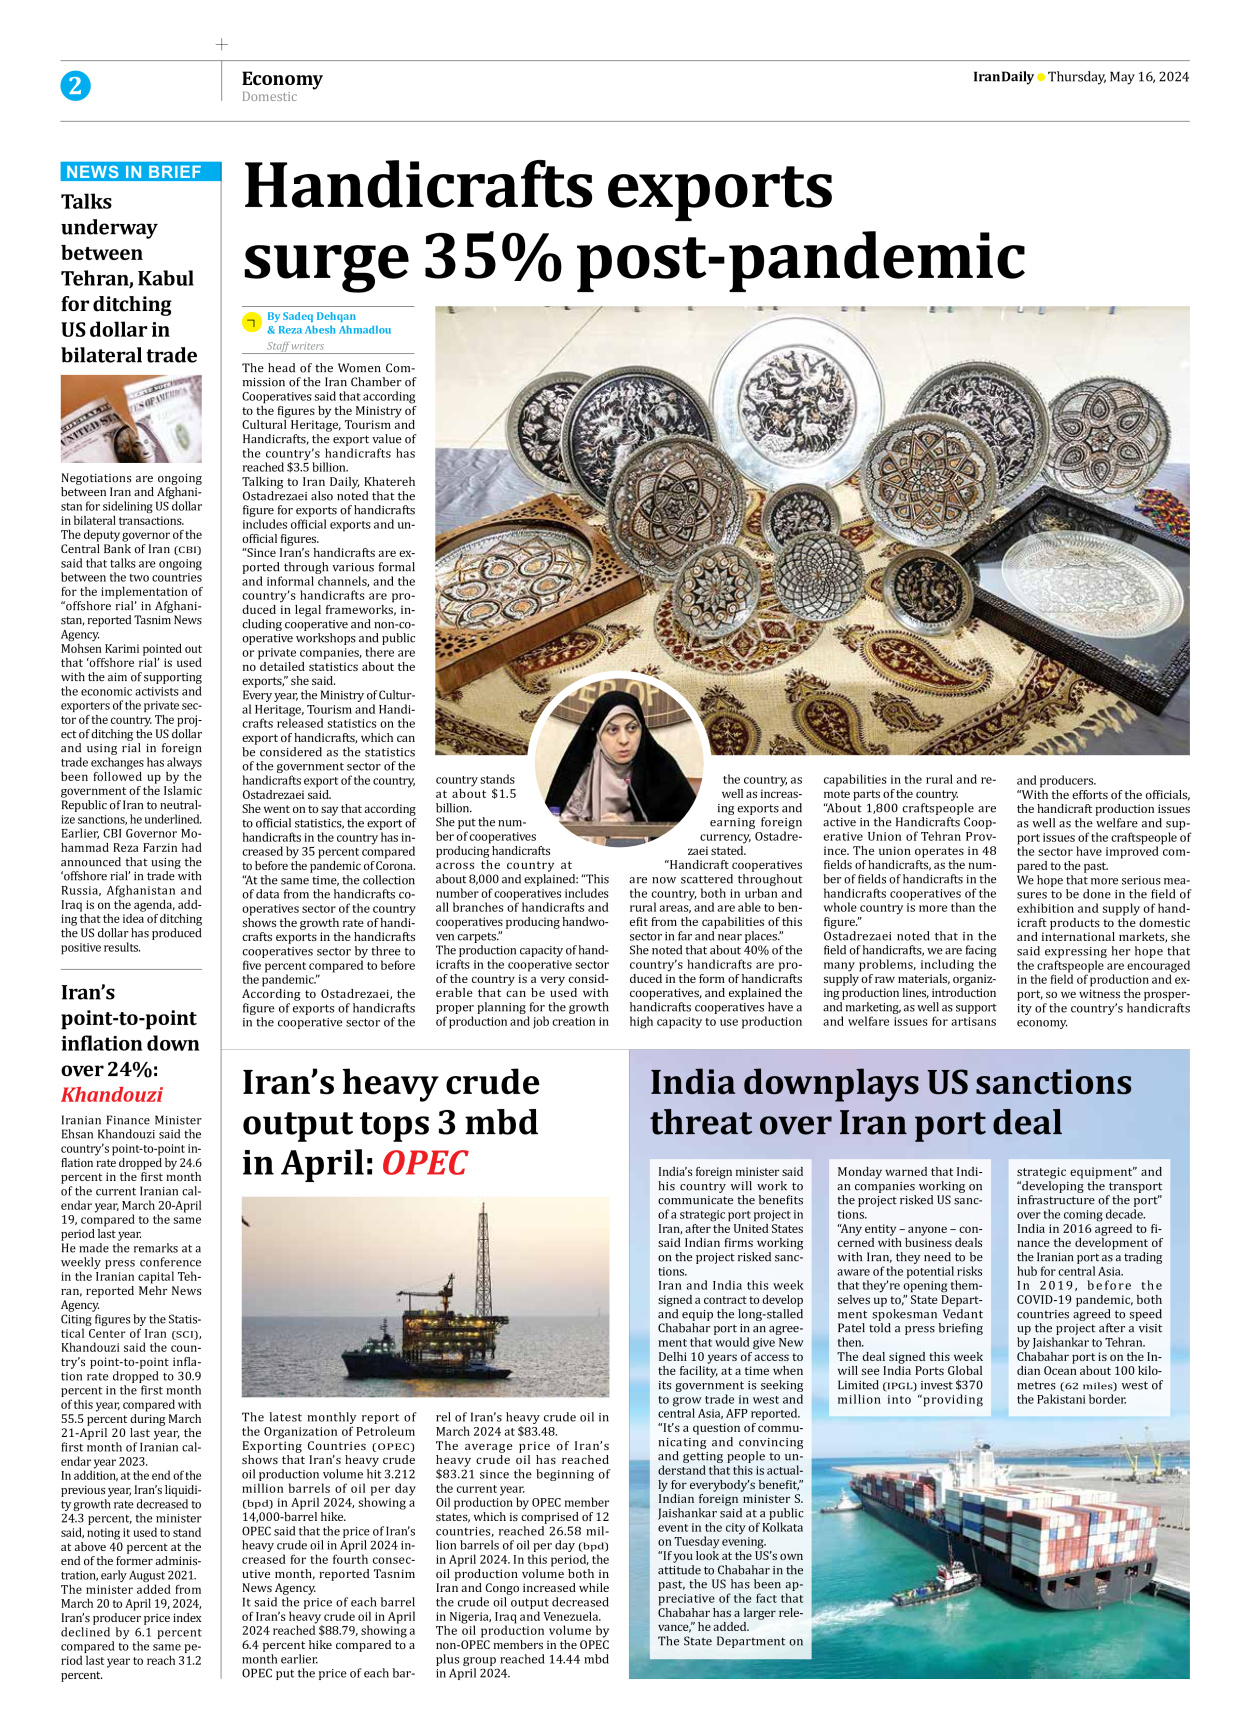 Iran Daily - Number Seven Thousand Five Hundred and Fifty Nine - 16 May 2024 - Page 2